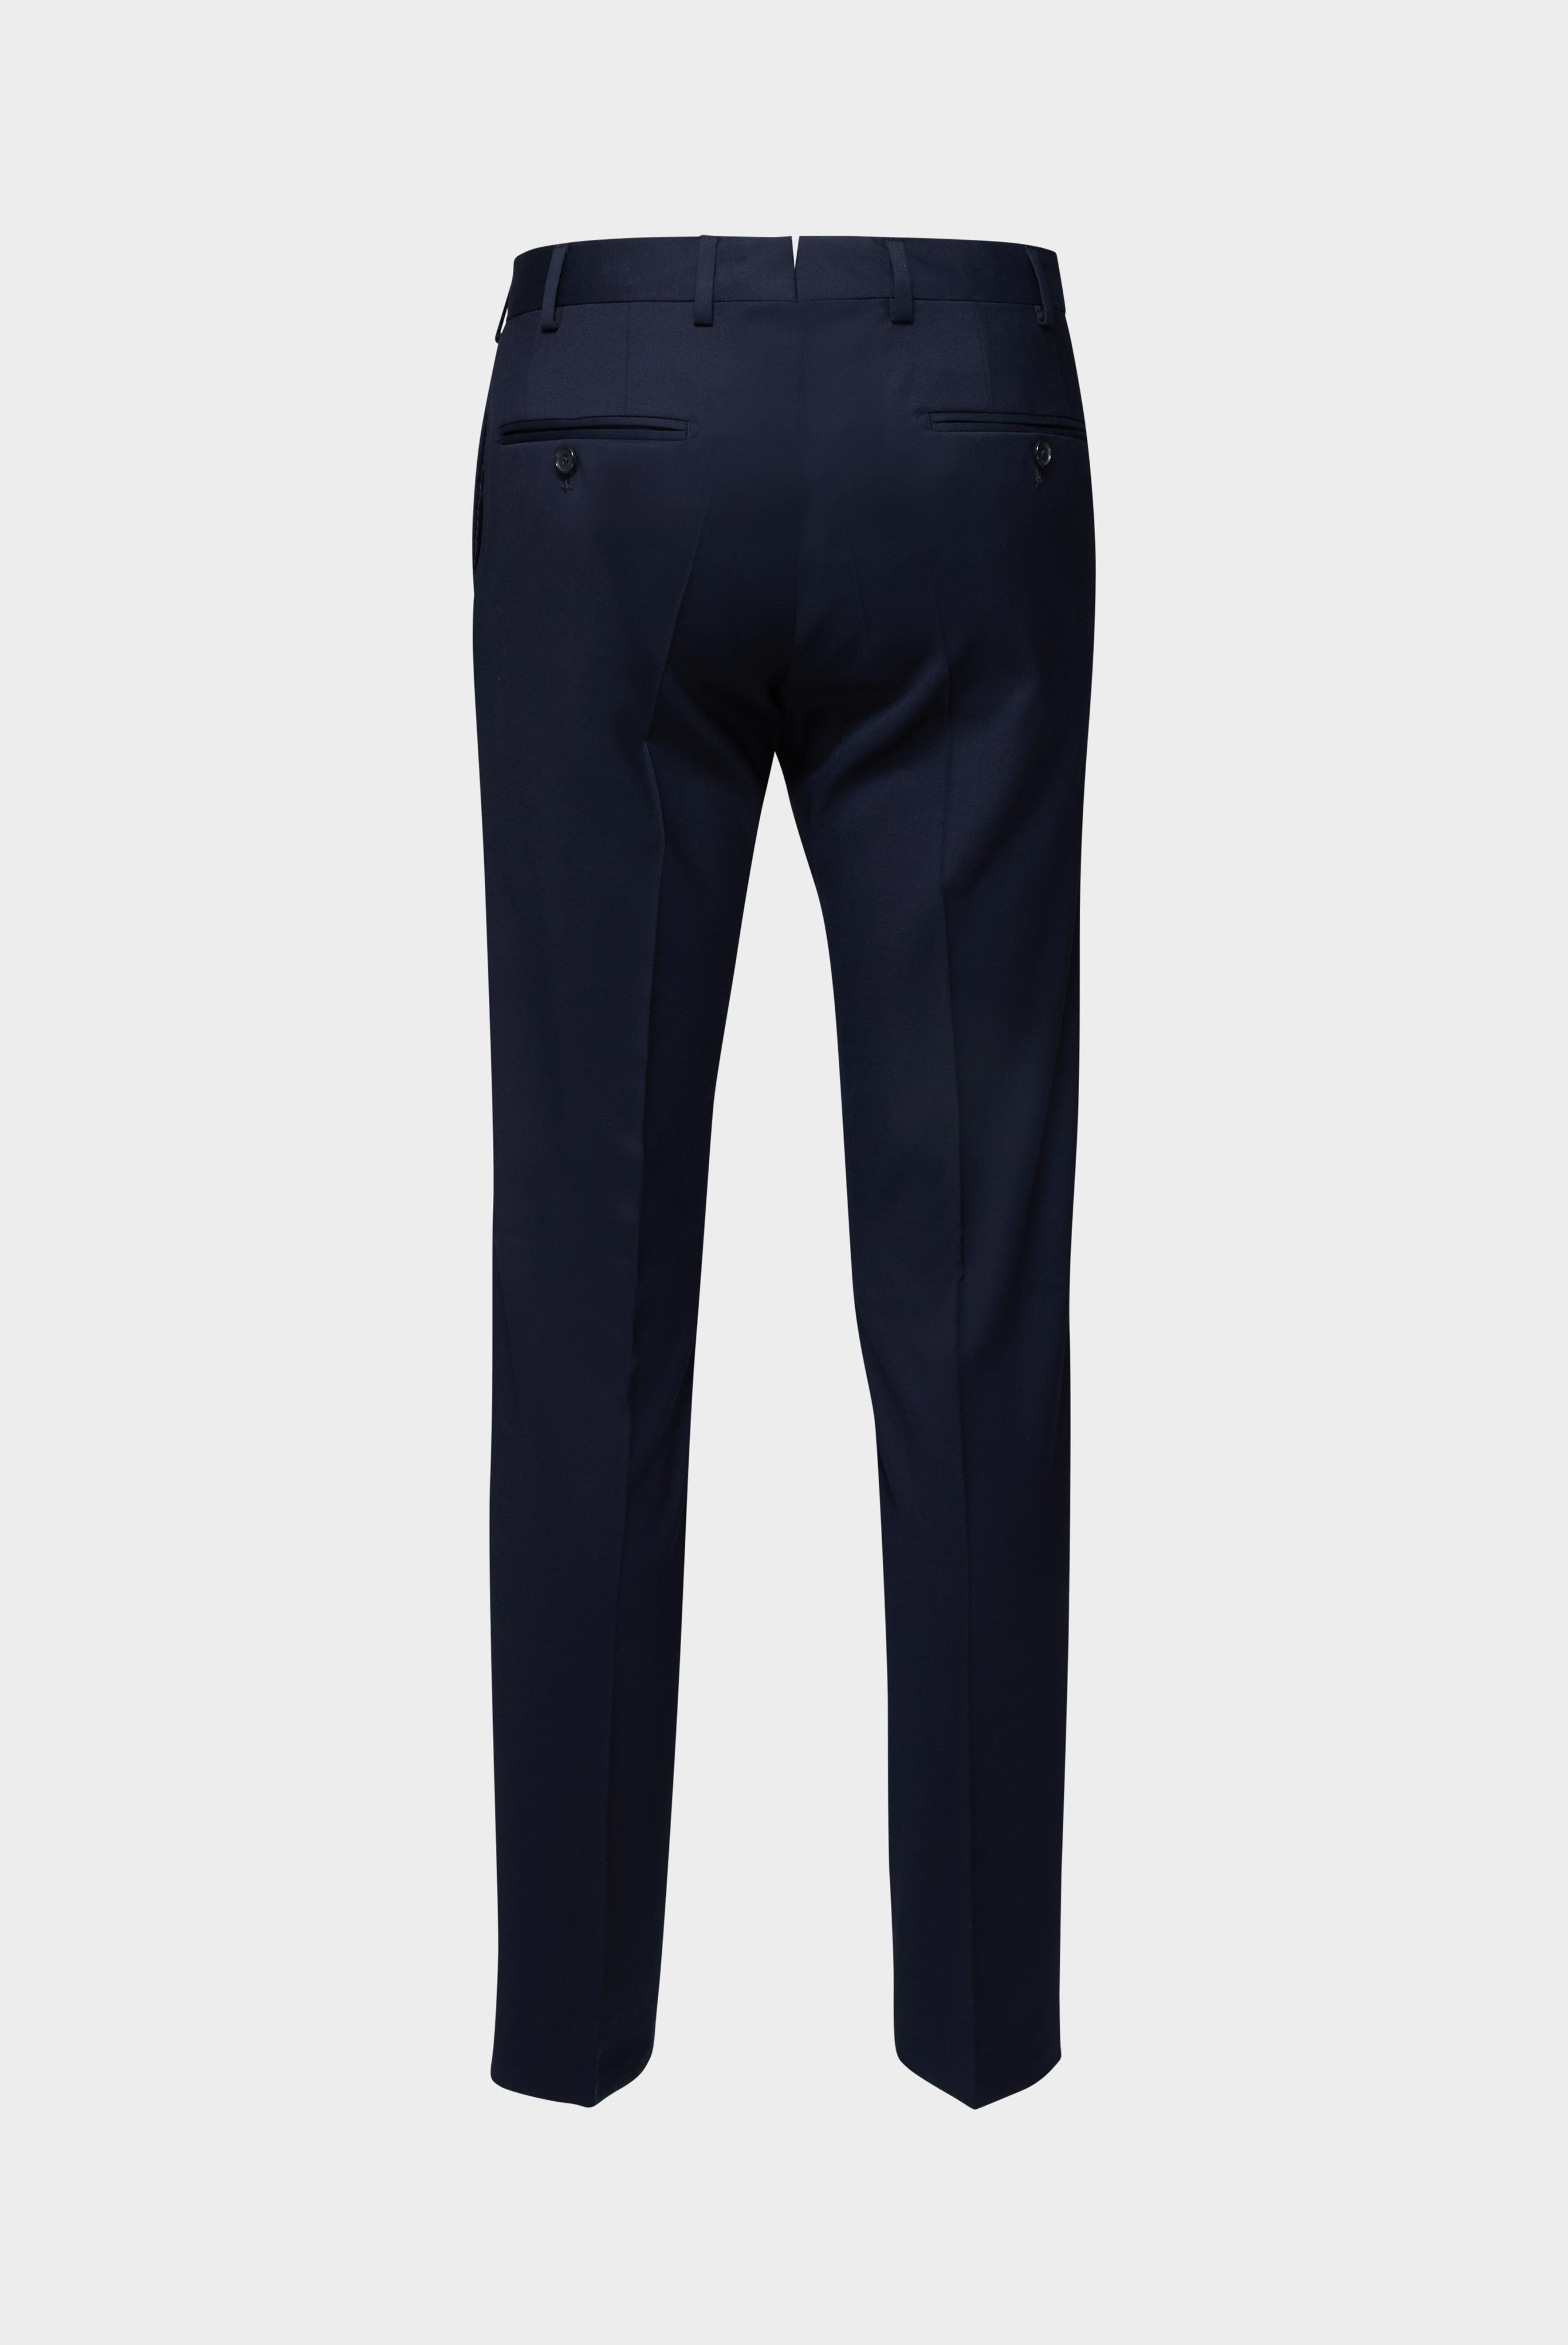 Jeans & Trousers+Wool Trousers Slim Fit+20.7880.16.H01010.780.31